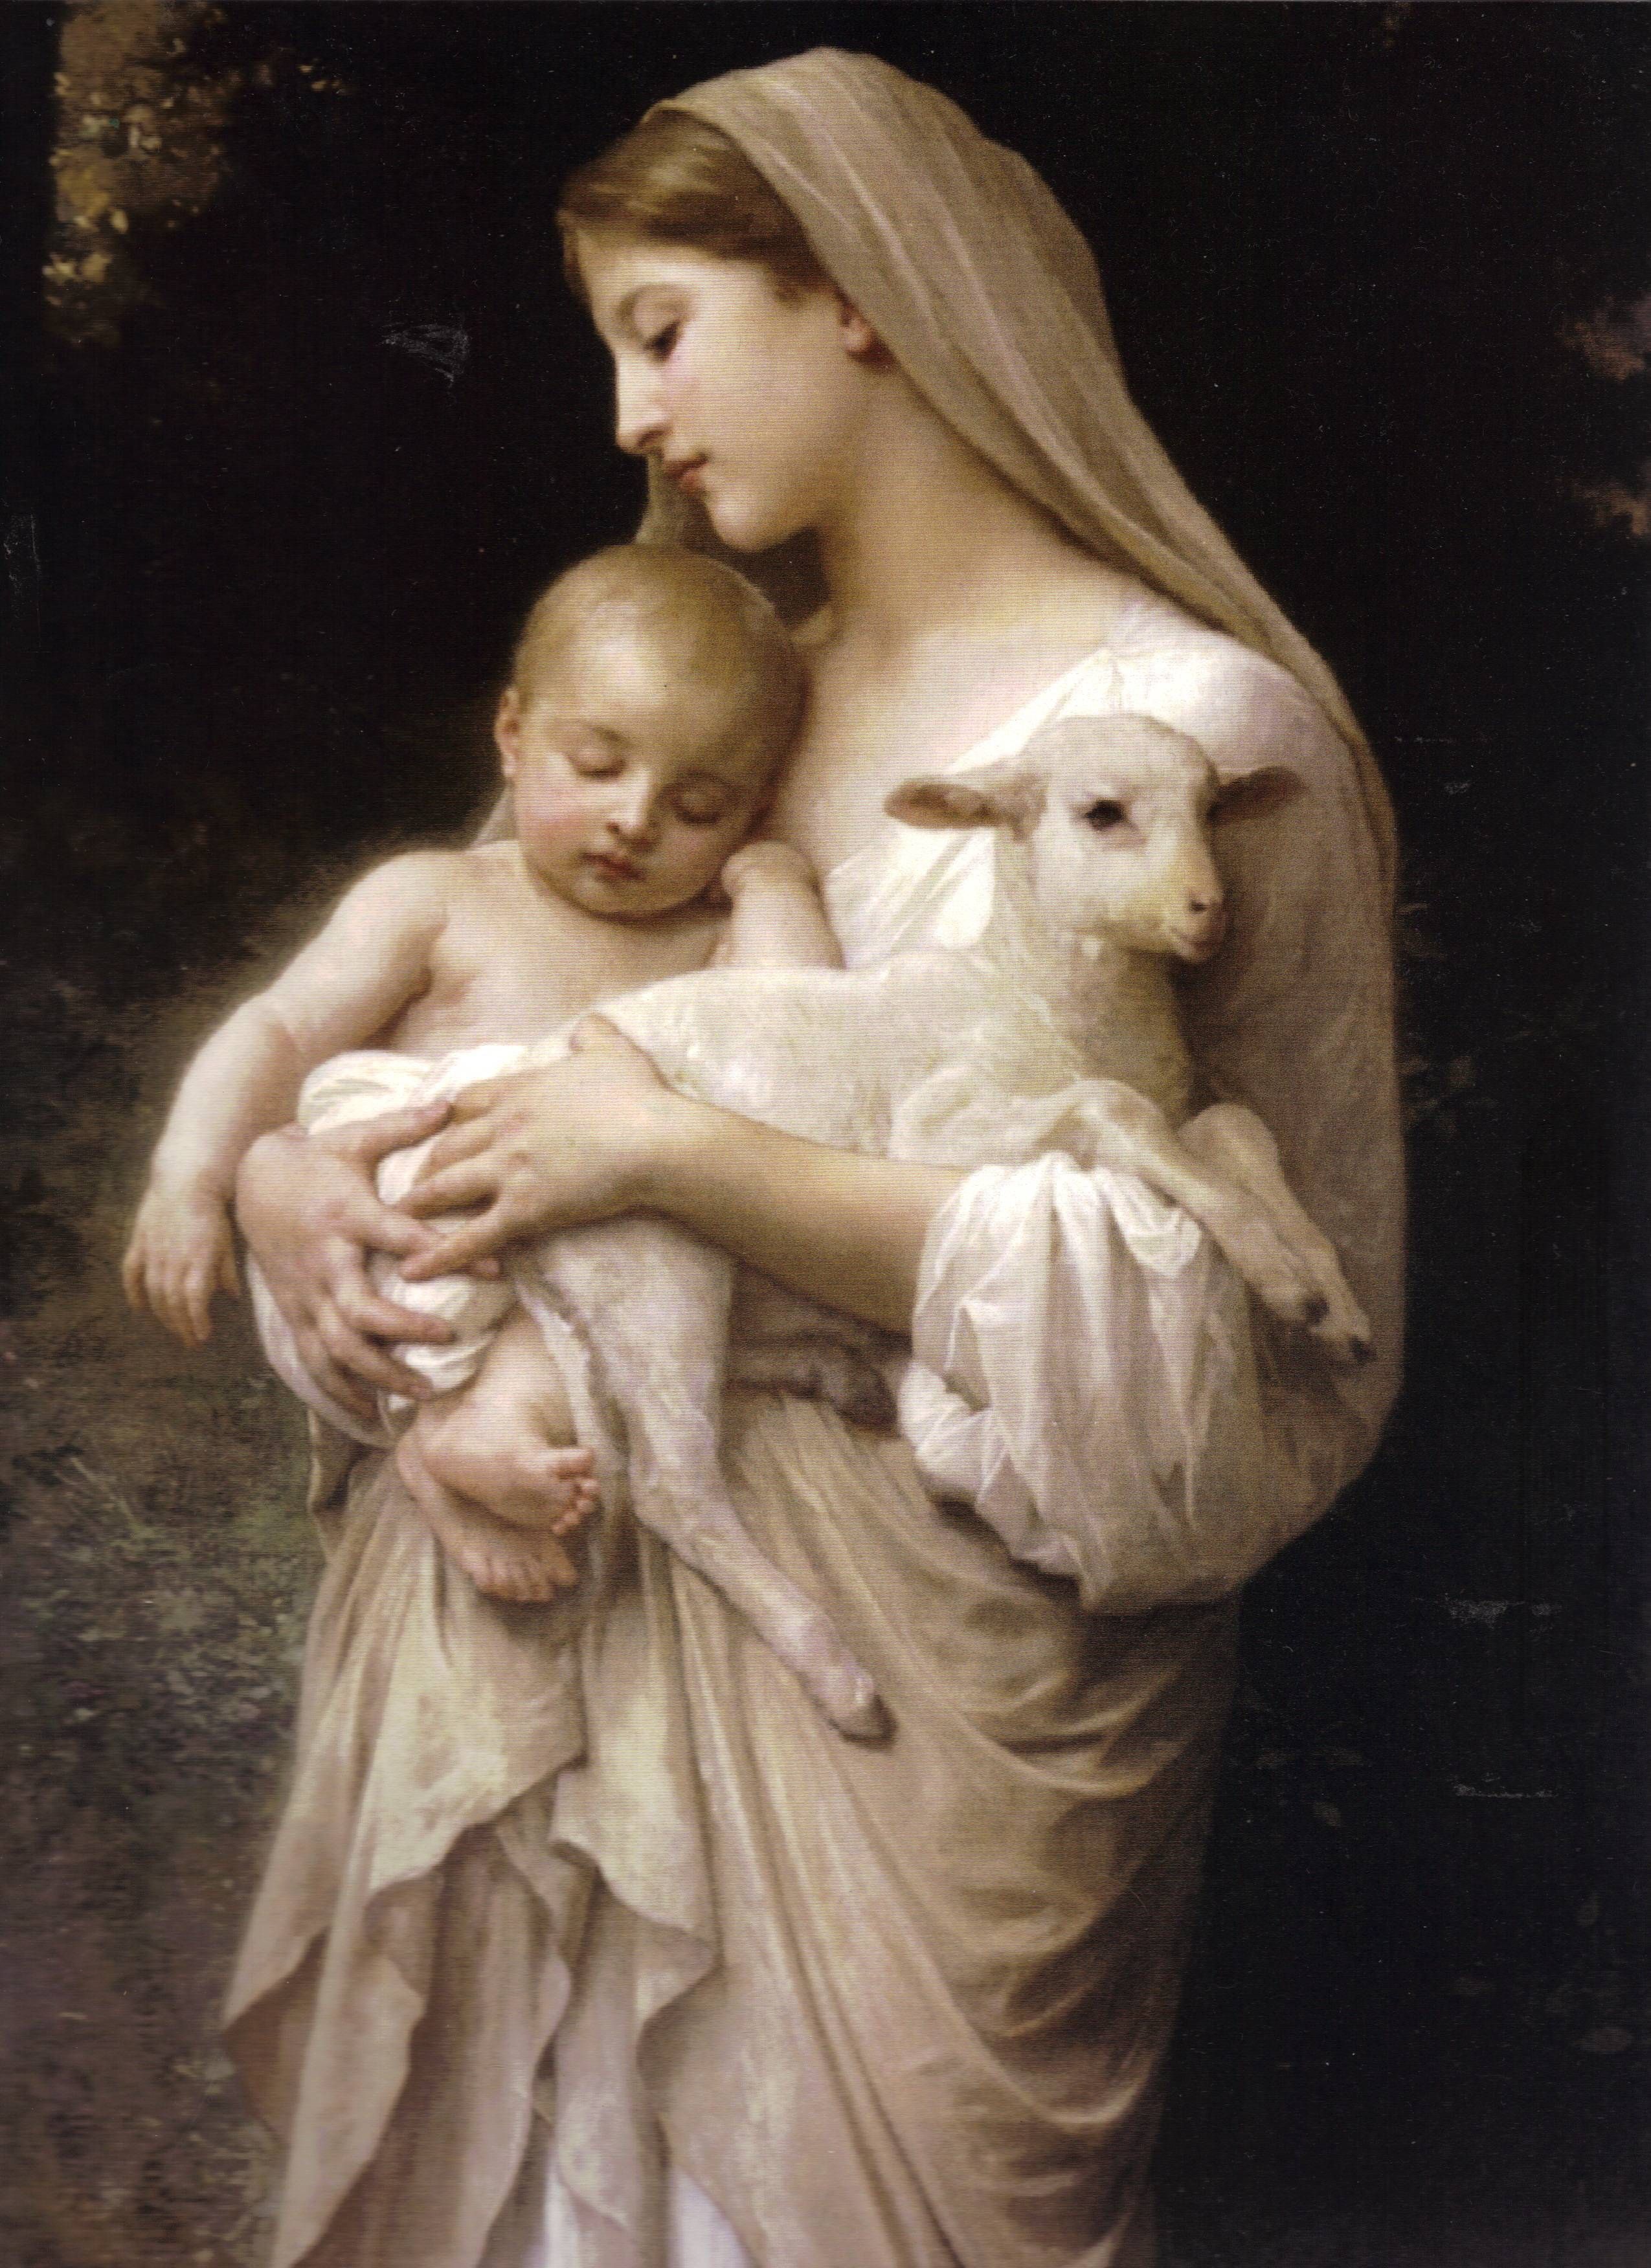 Mother Mary with Baby Jesus Wallpaper